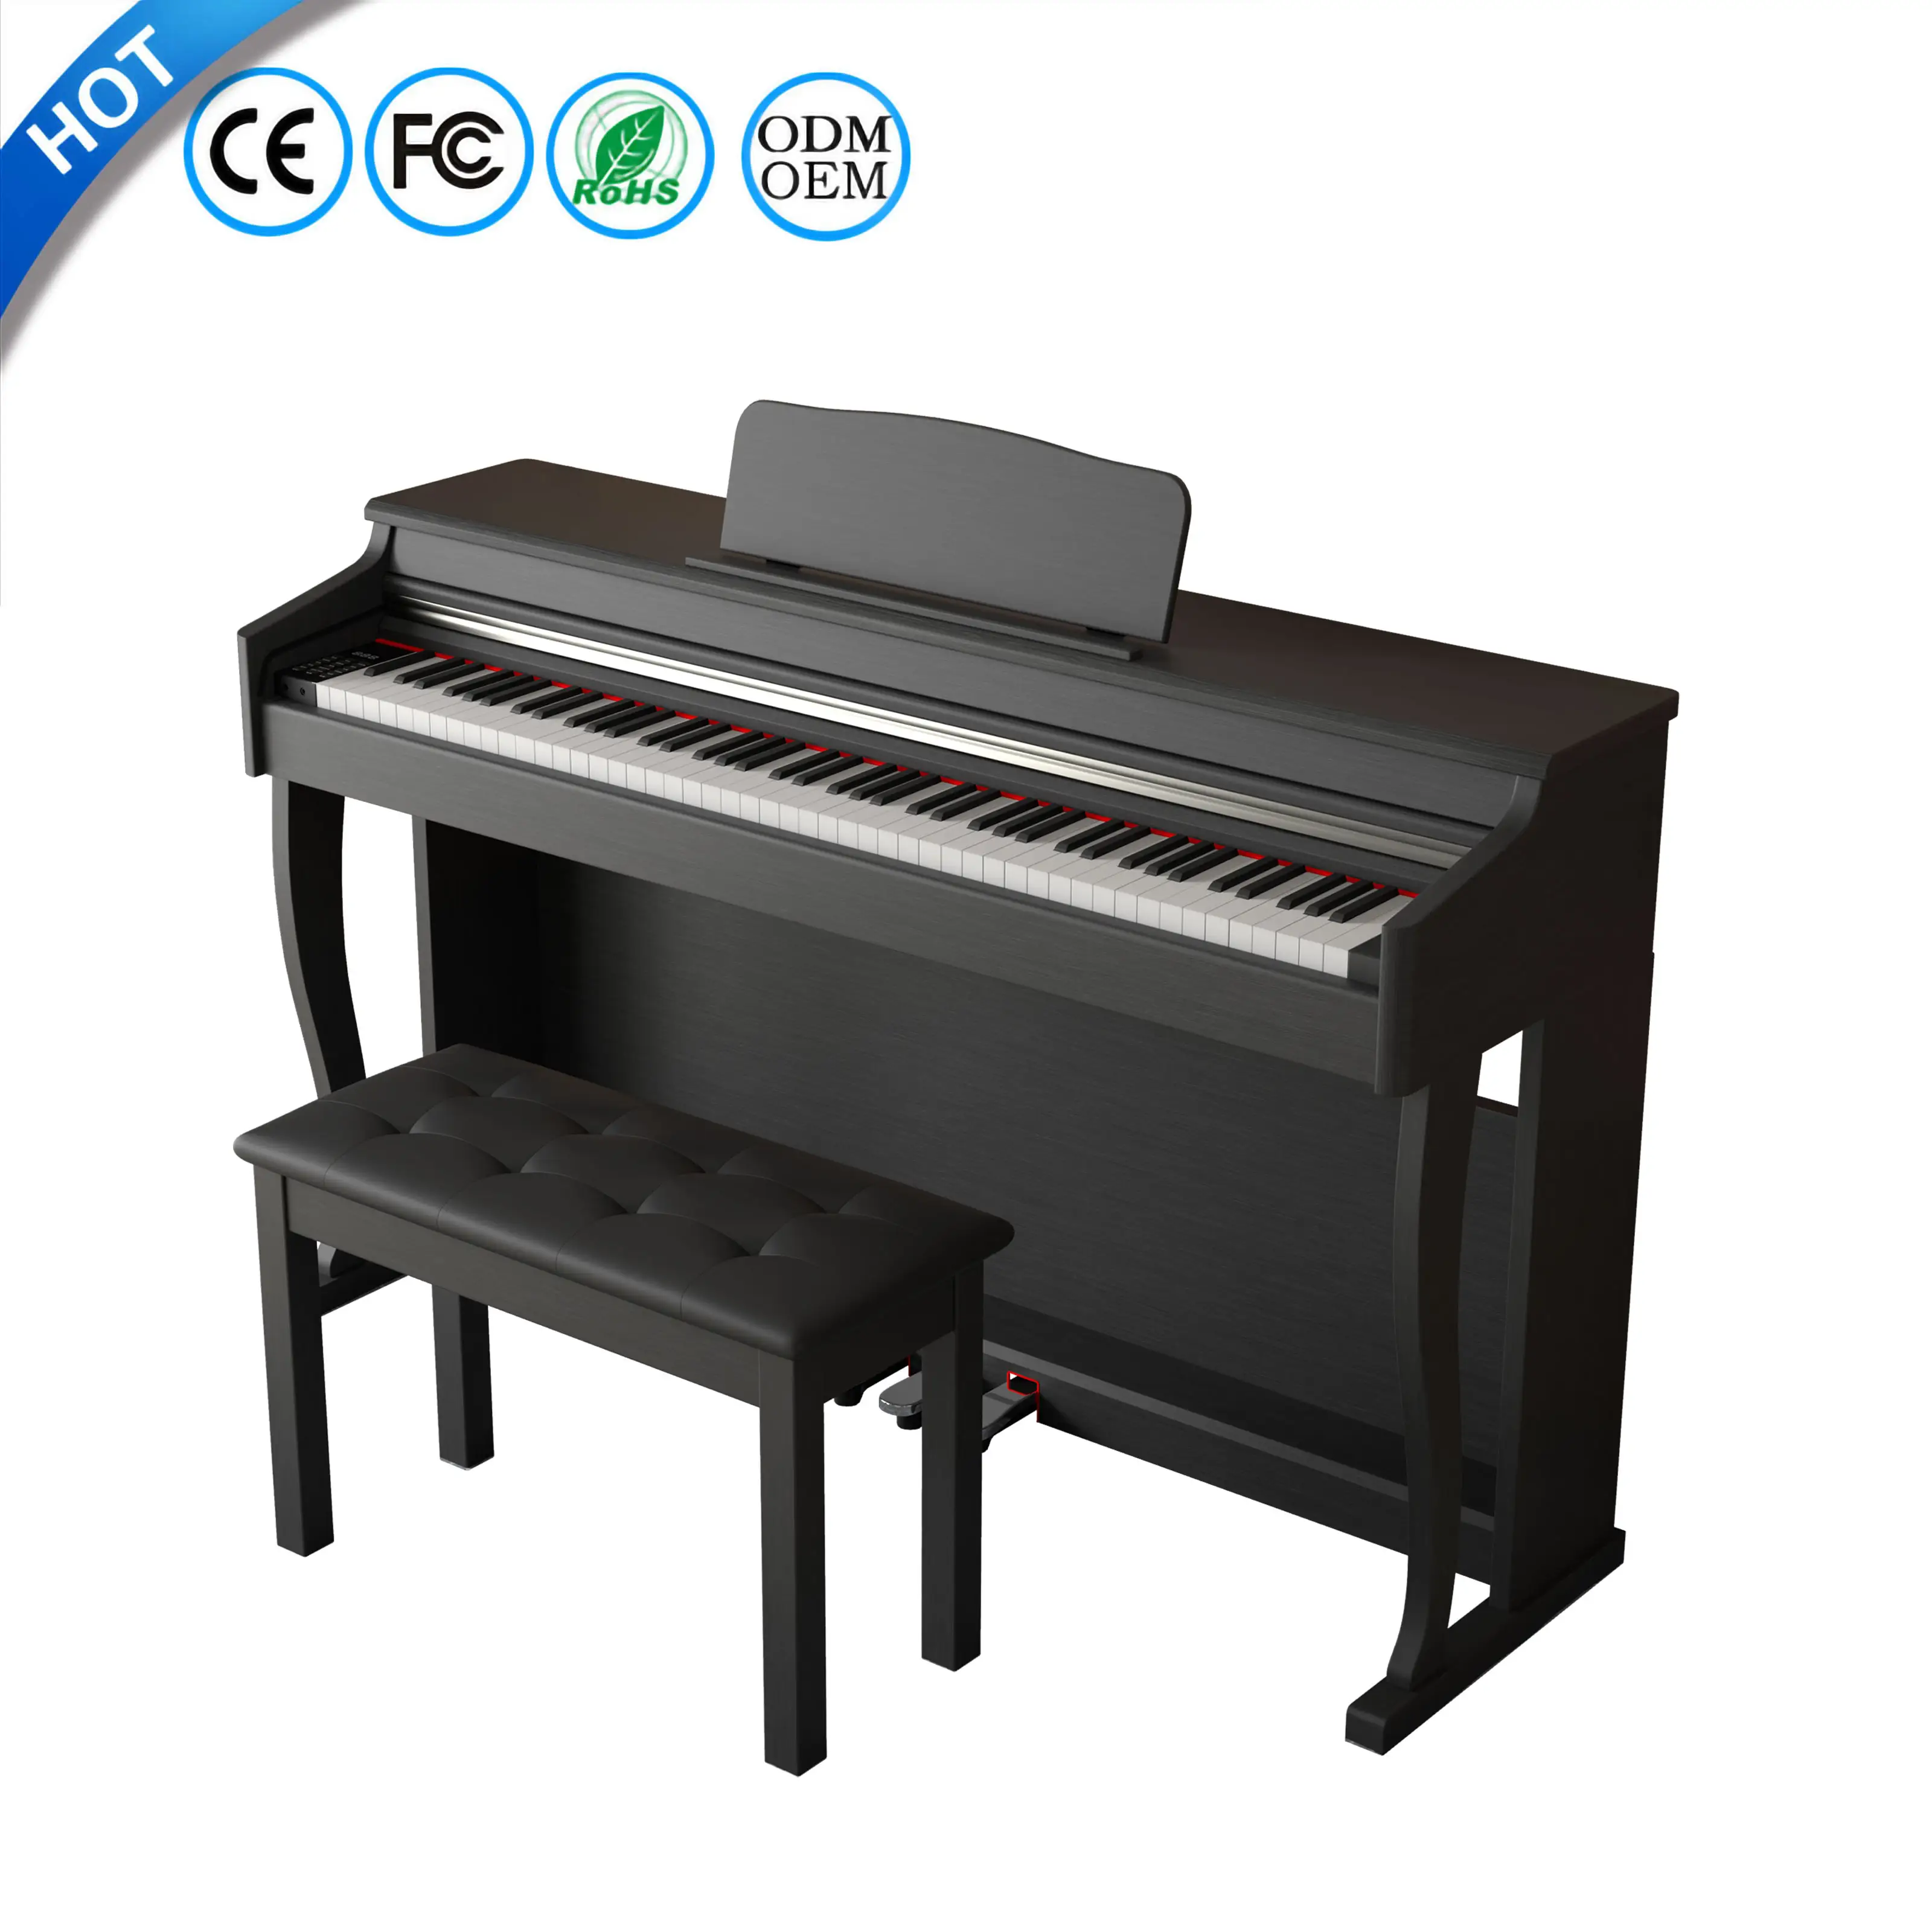 Electric Piano Grand Electronique 88 Touches Keyboard Digital Piano Digital 88 Keys Piano Keyboard Instrument